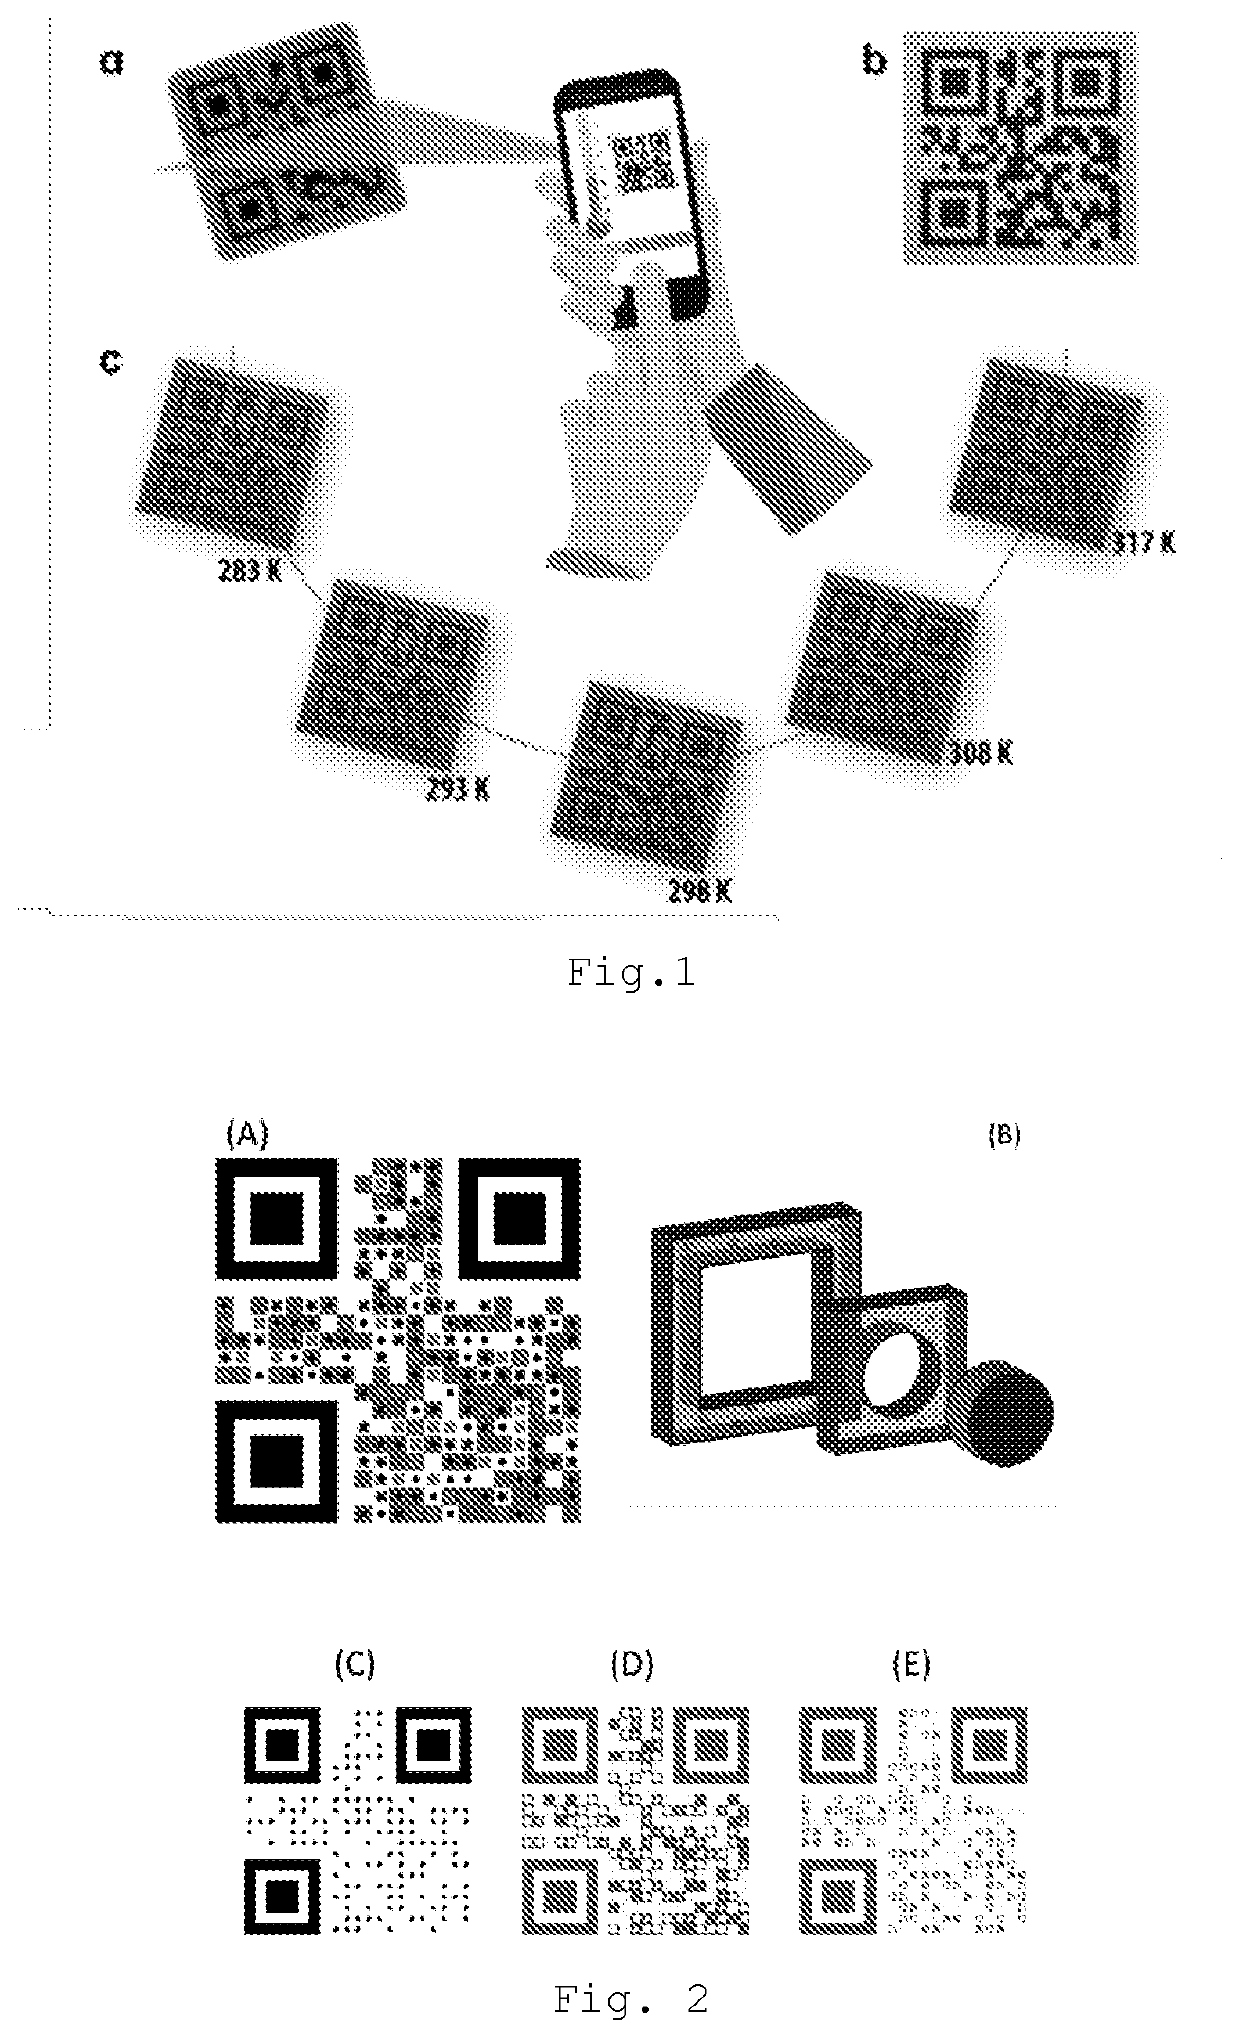 Multiplexed luminescent qr codes for smart labelling, for measuring physical parameters and real-time traceability and authentication